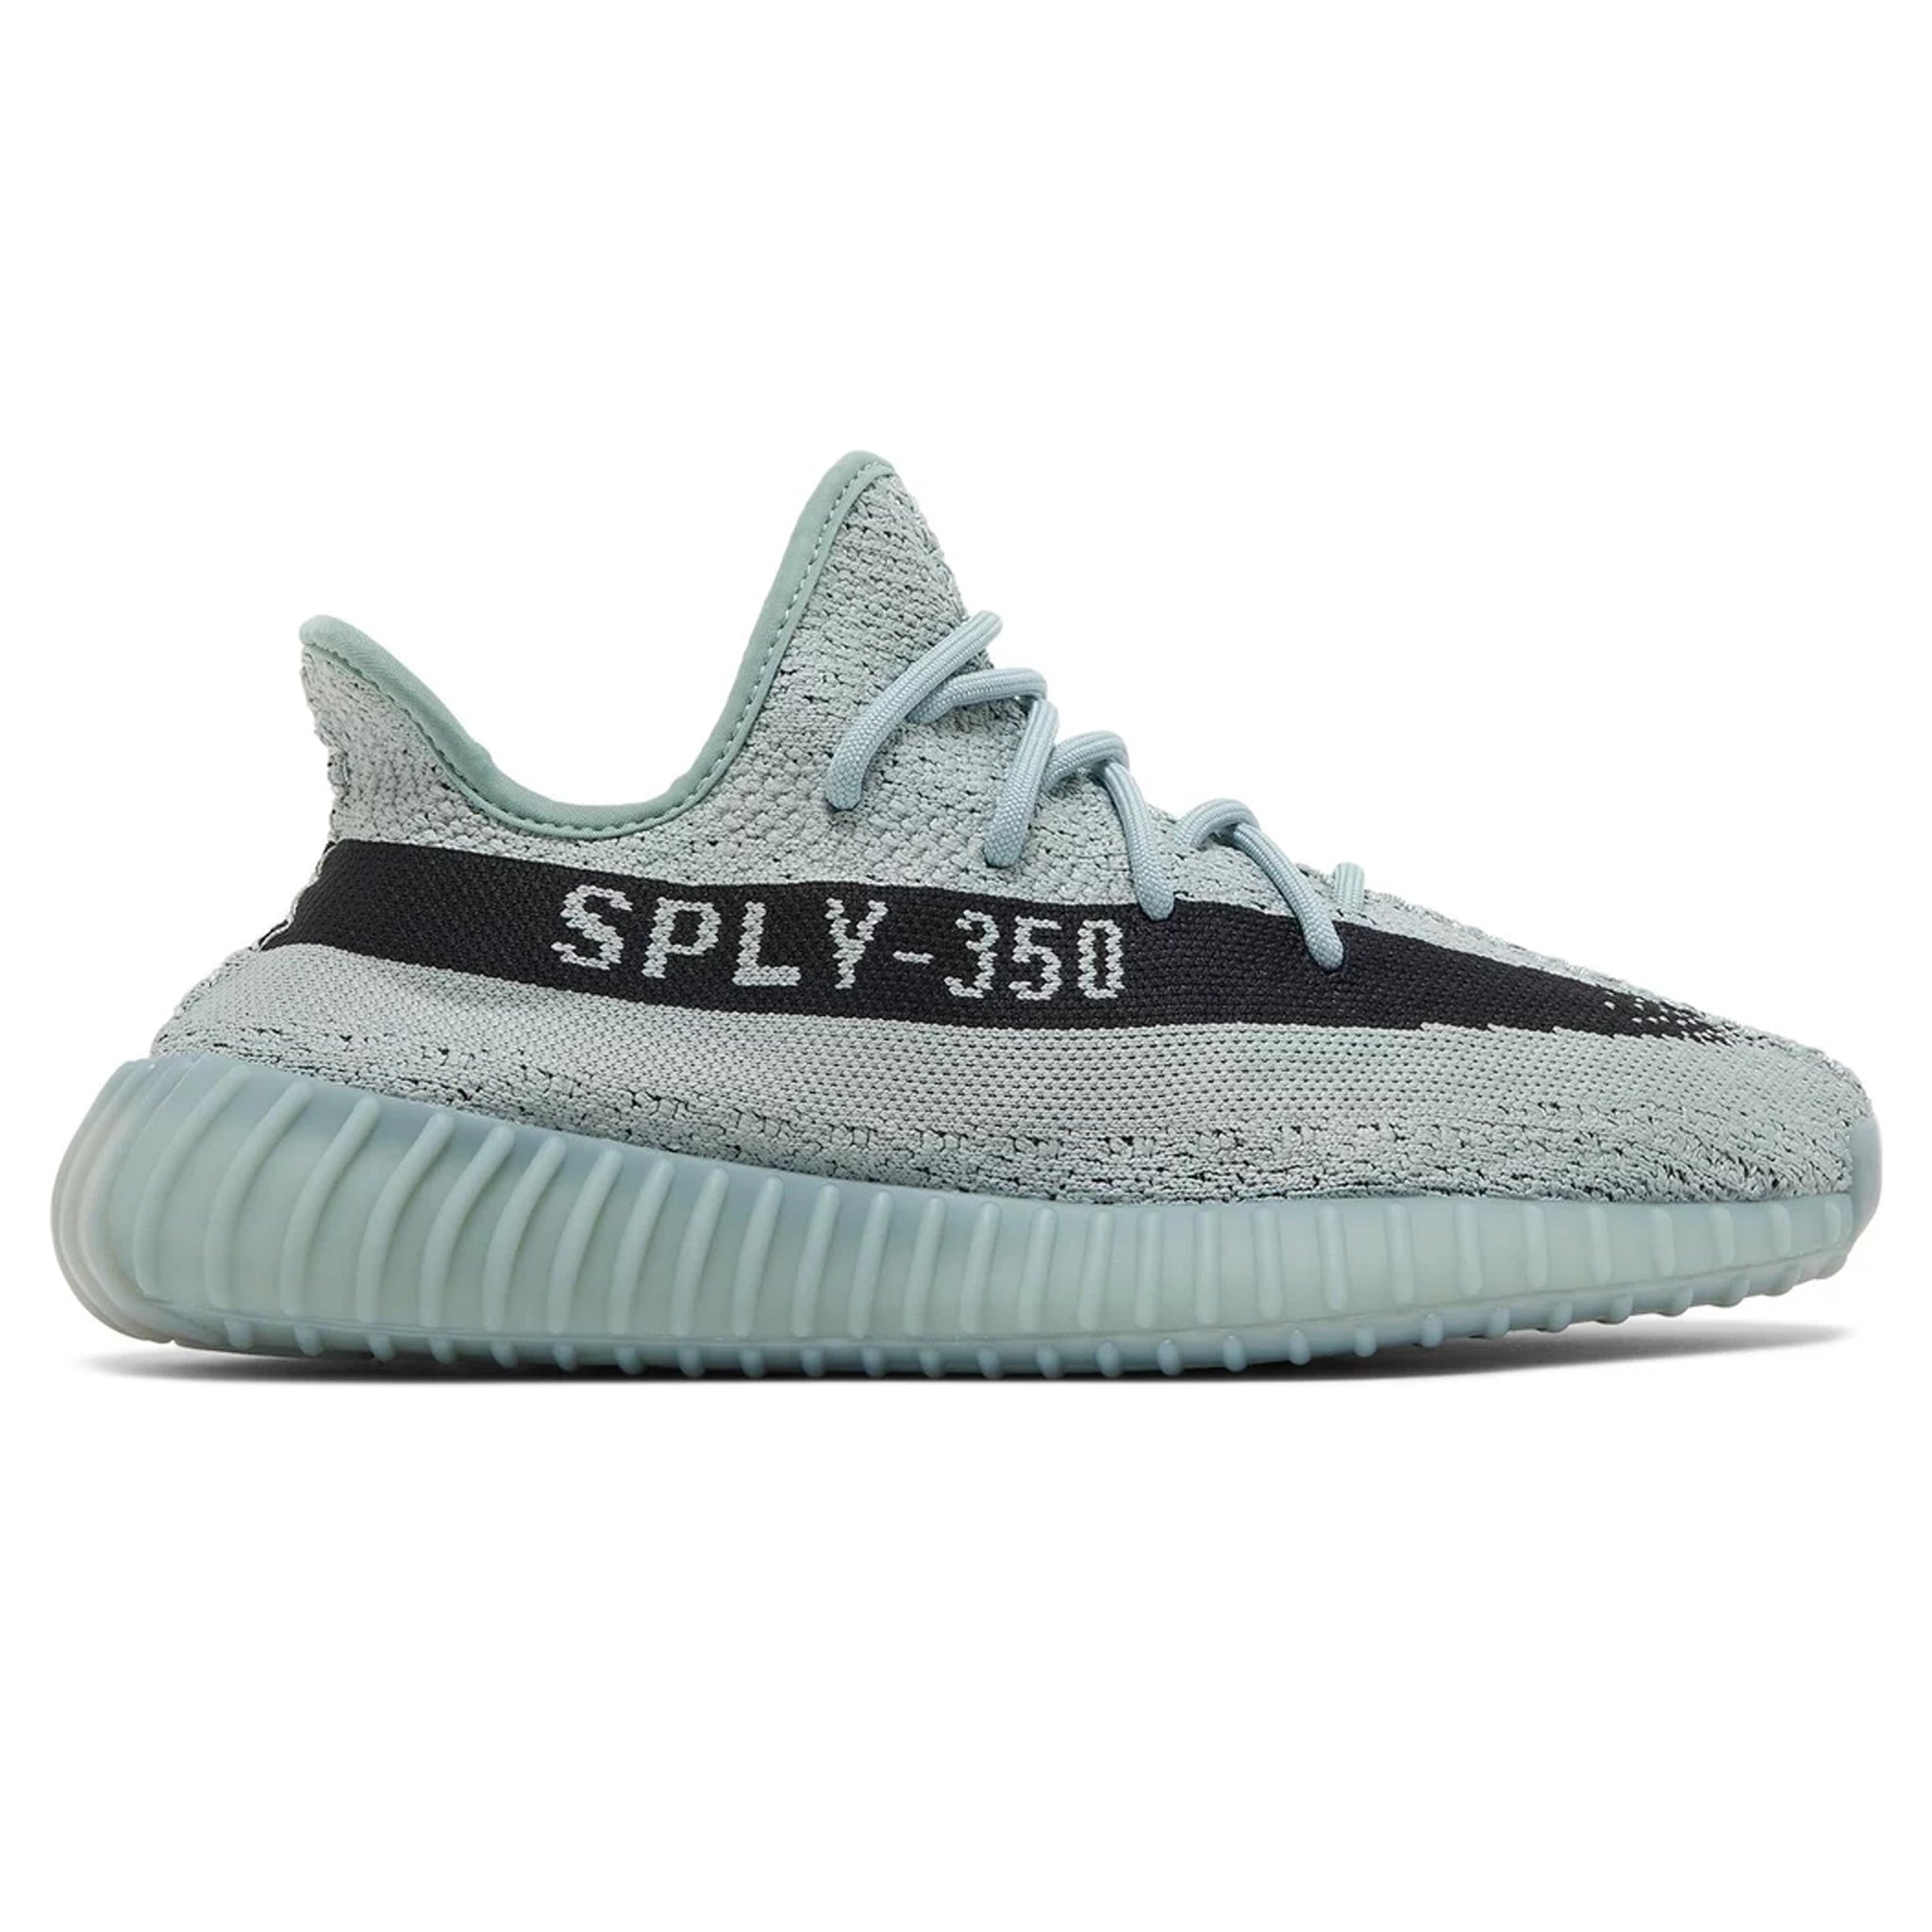 Side view of Adidas Yeezy Boost 350 V2 Salt HQ2060